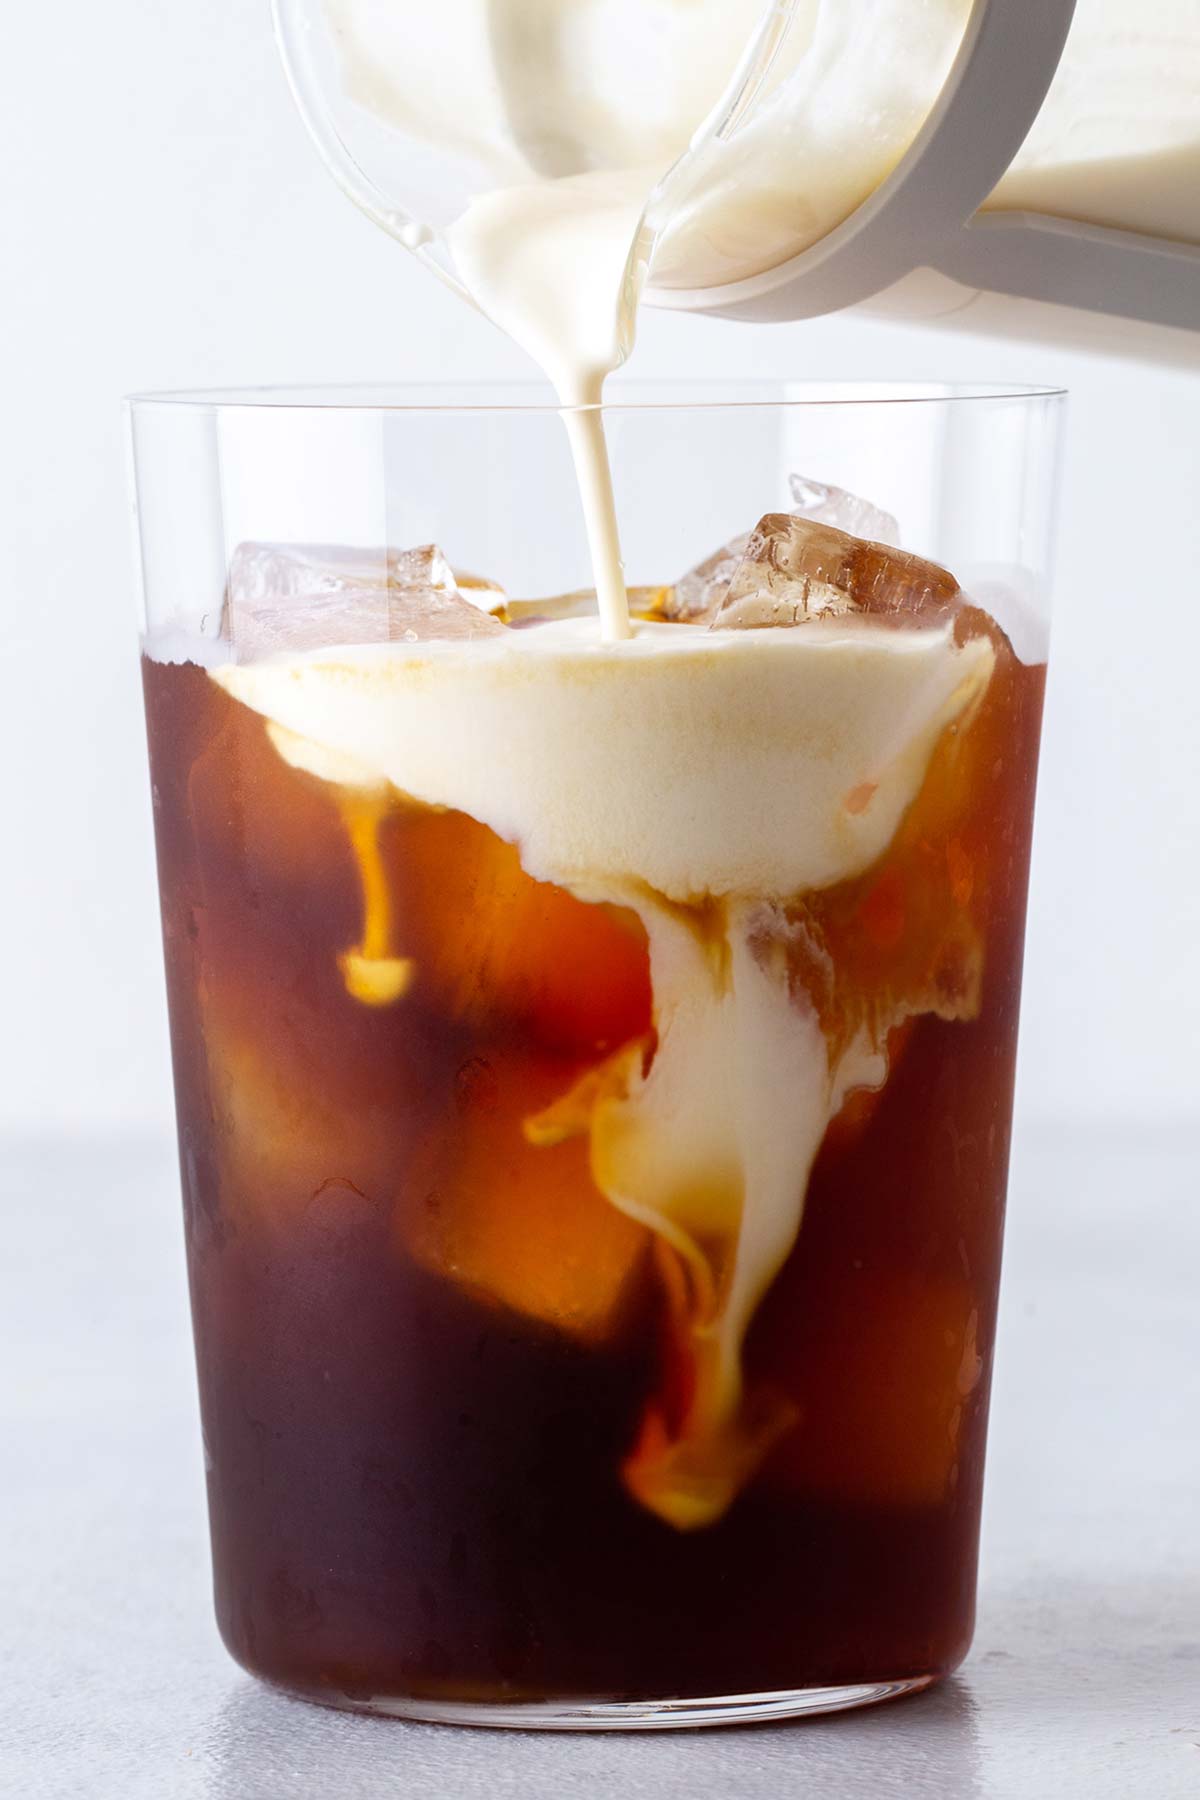 Carmel cold foam being poured into an iced coffee in a glass.